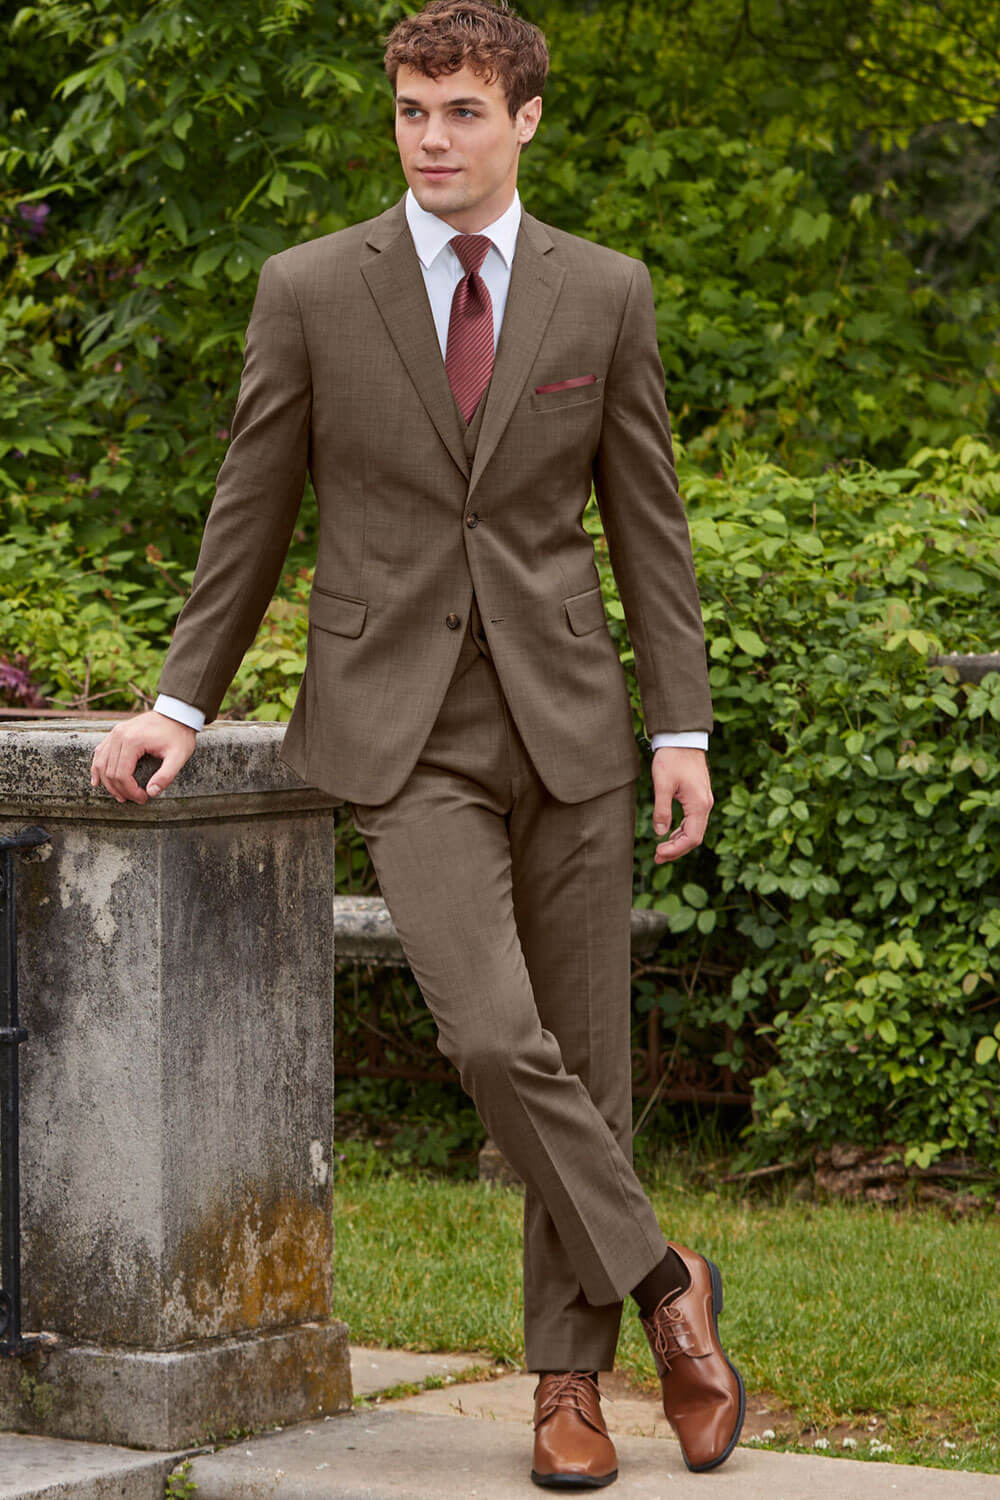 Shop Suits for Men in India - Choose Suit Size, Fabric, Pattern and Color-tmf.edu.vn